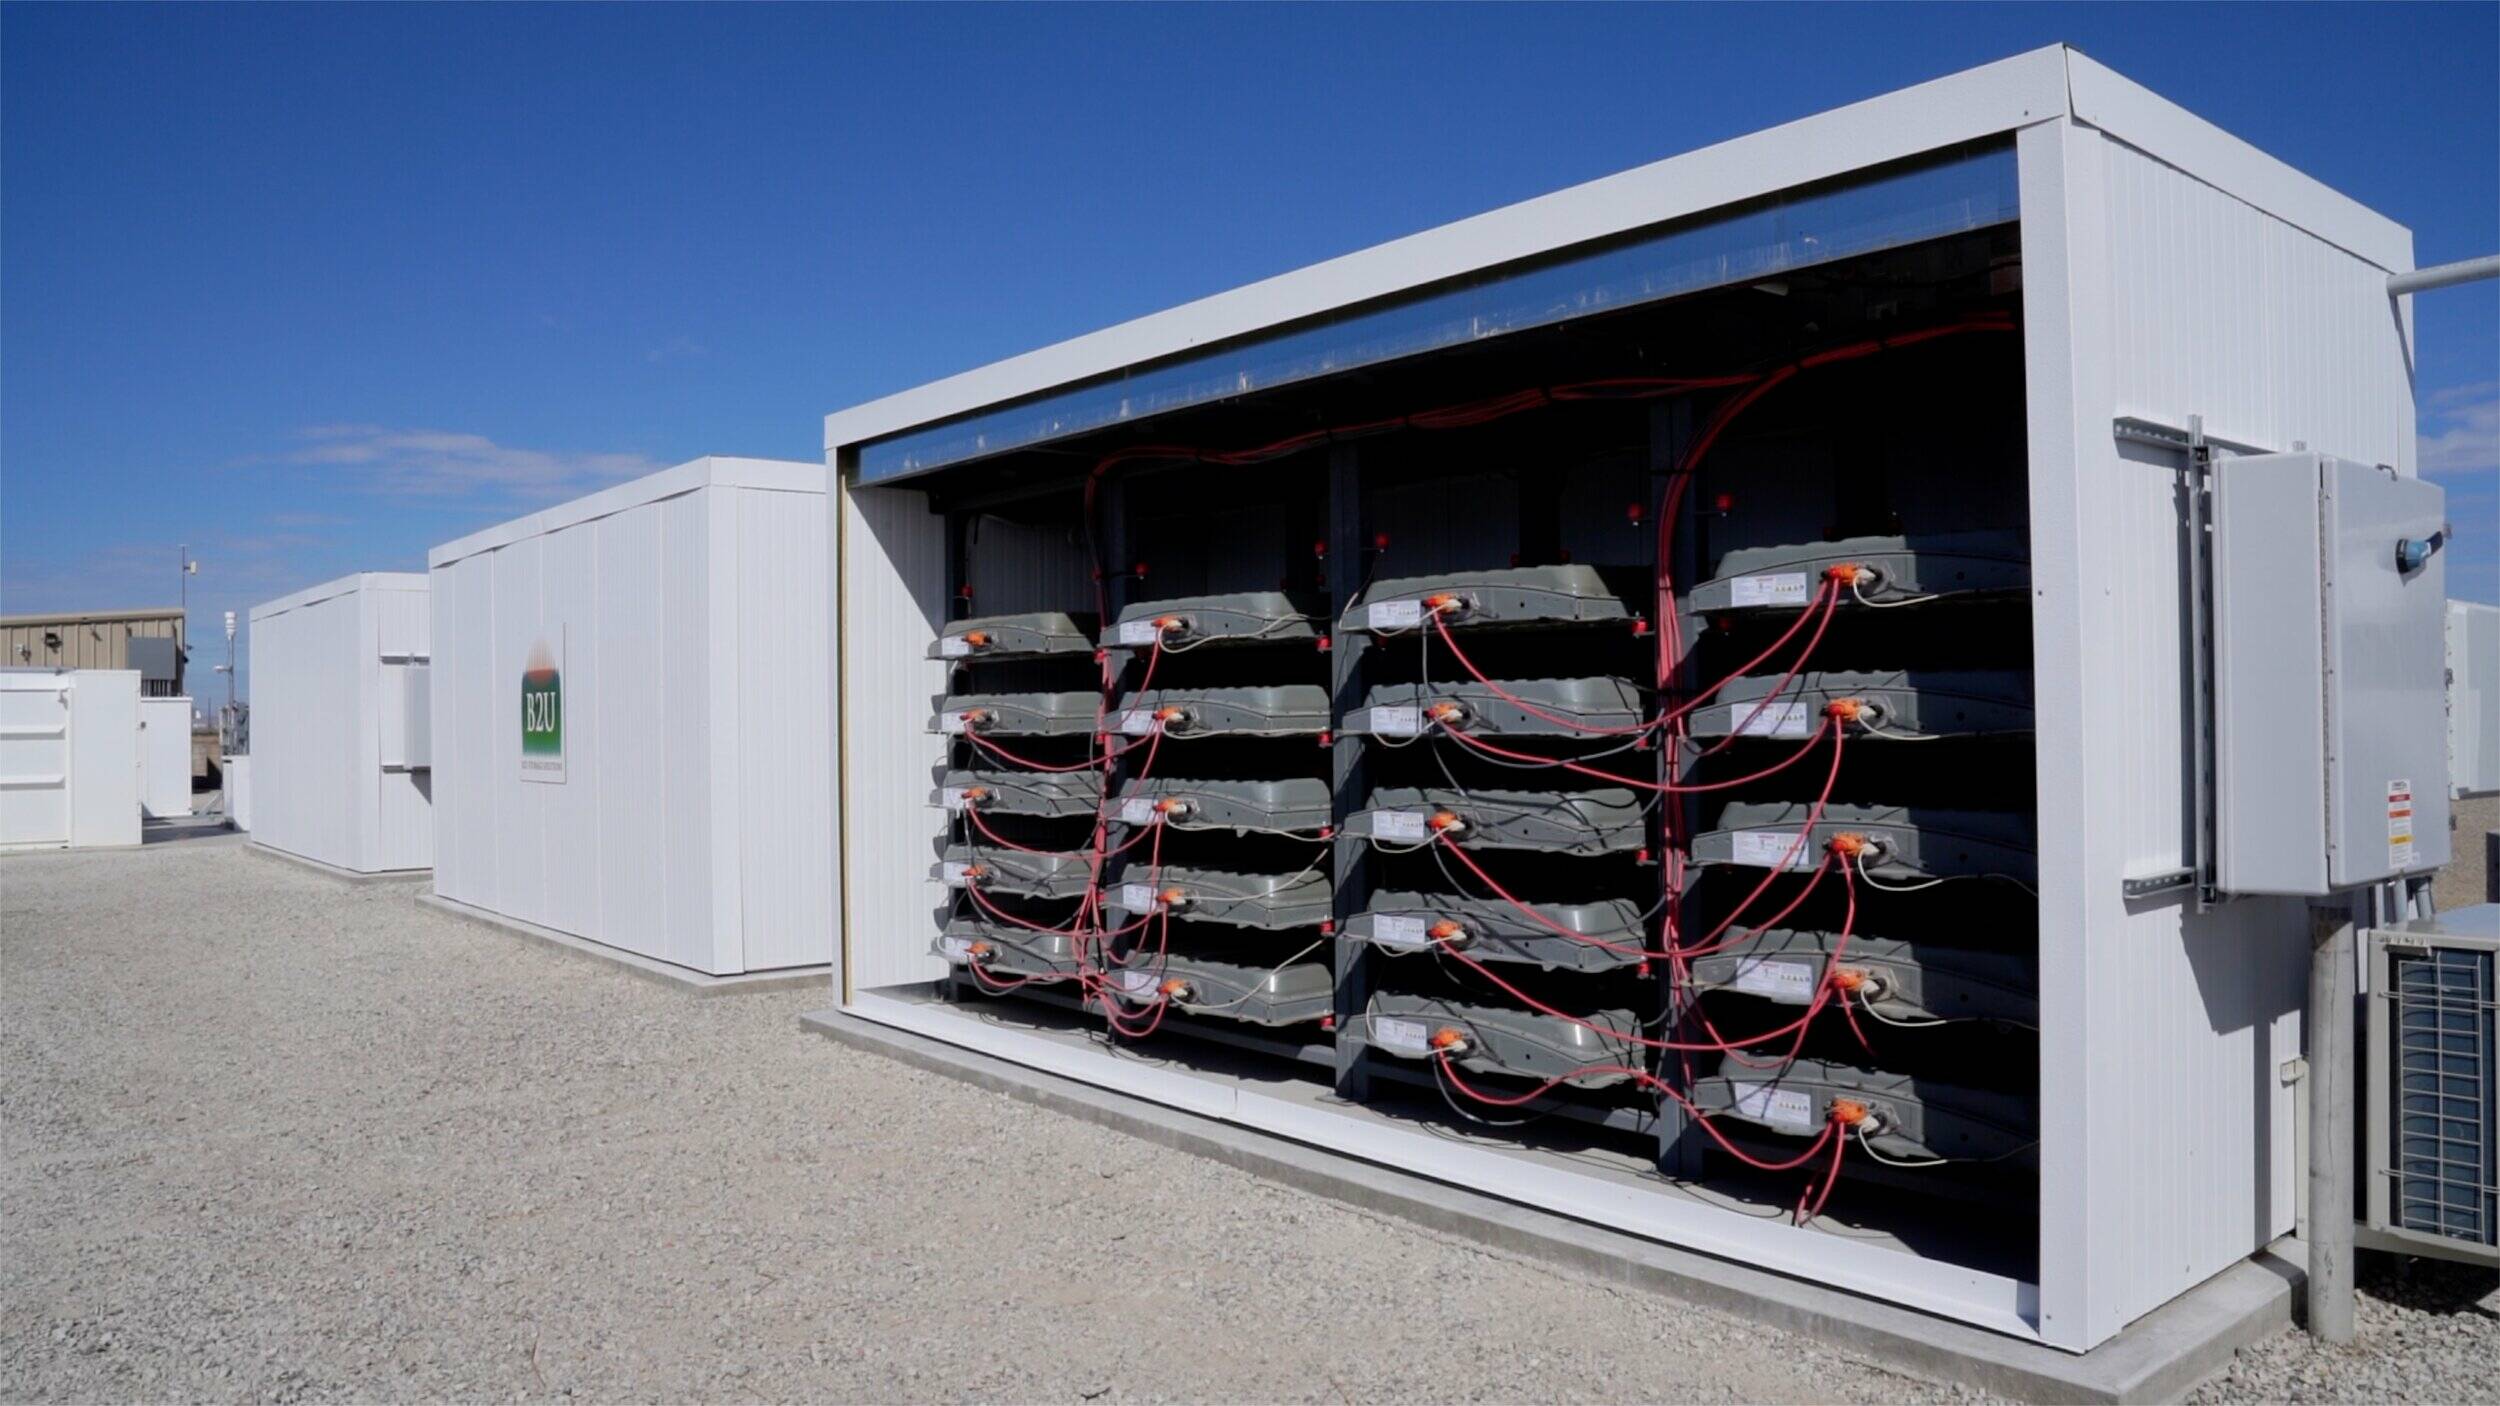 used-ev-car-batteries-find-new-life-storing-solar-power-in-california